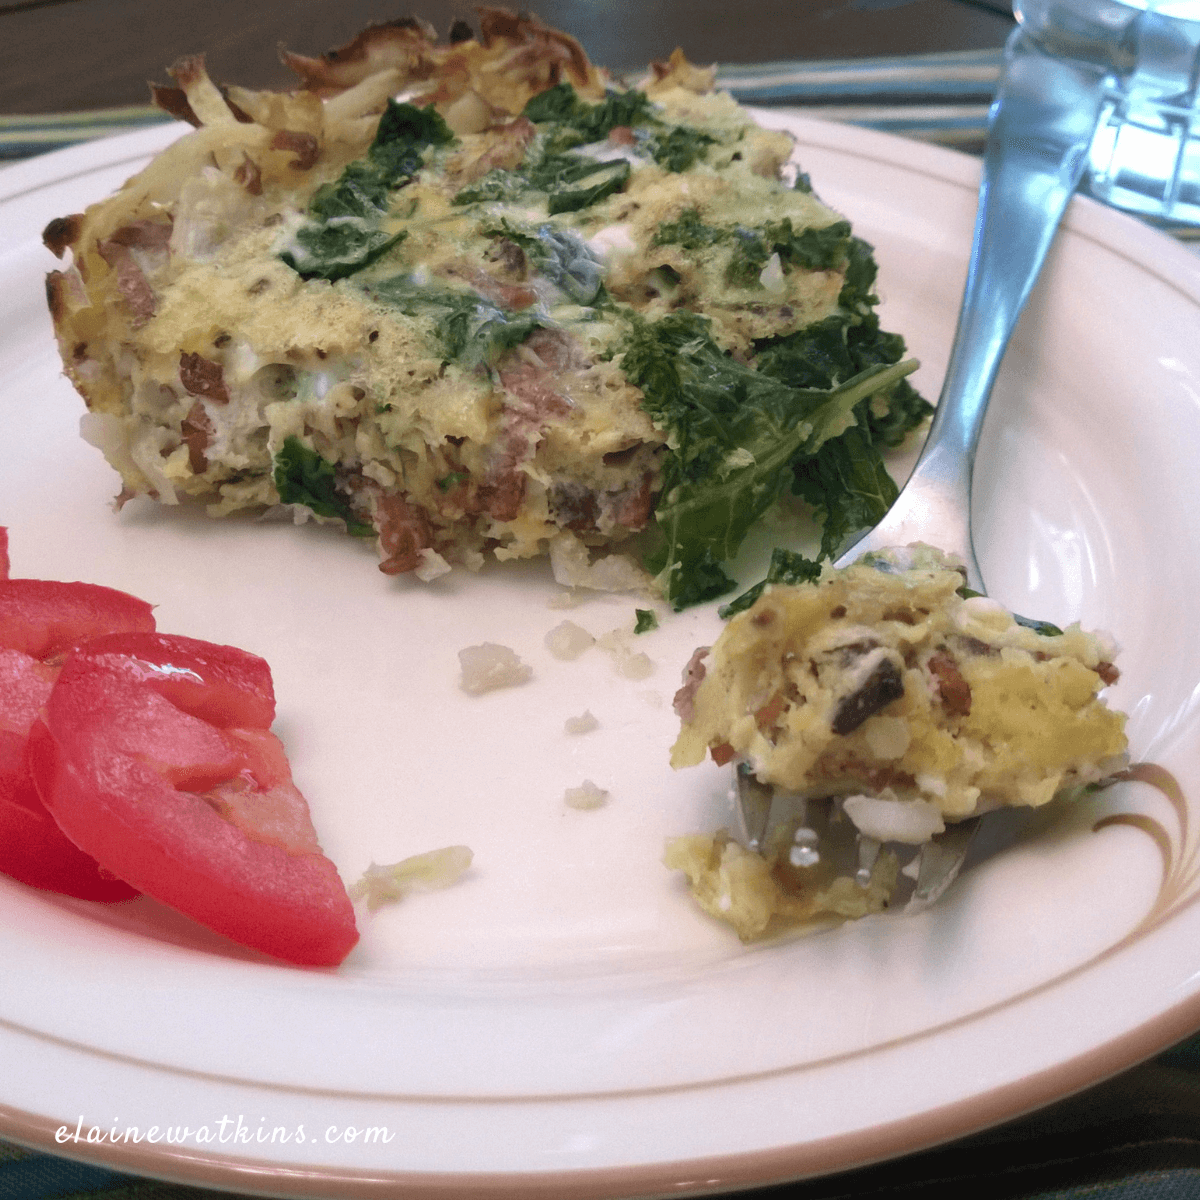 Bacon and Kale Quiche with Hash Brown Crust (gluten free, dairy free)